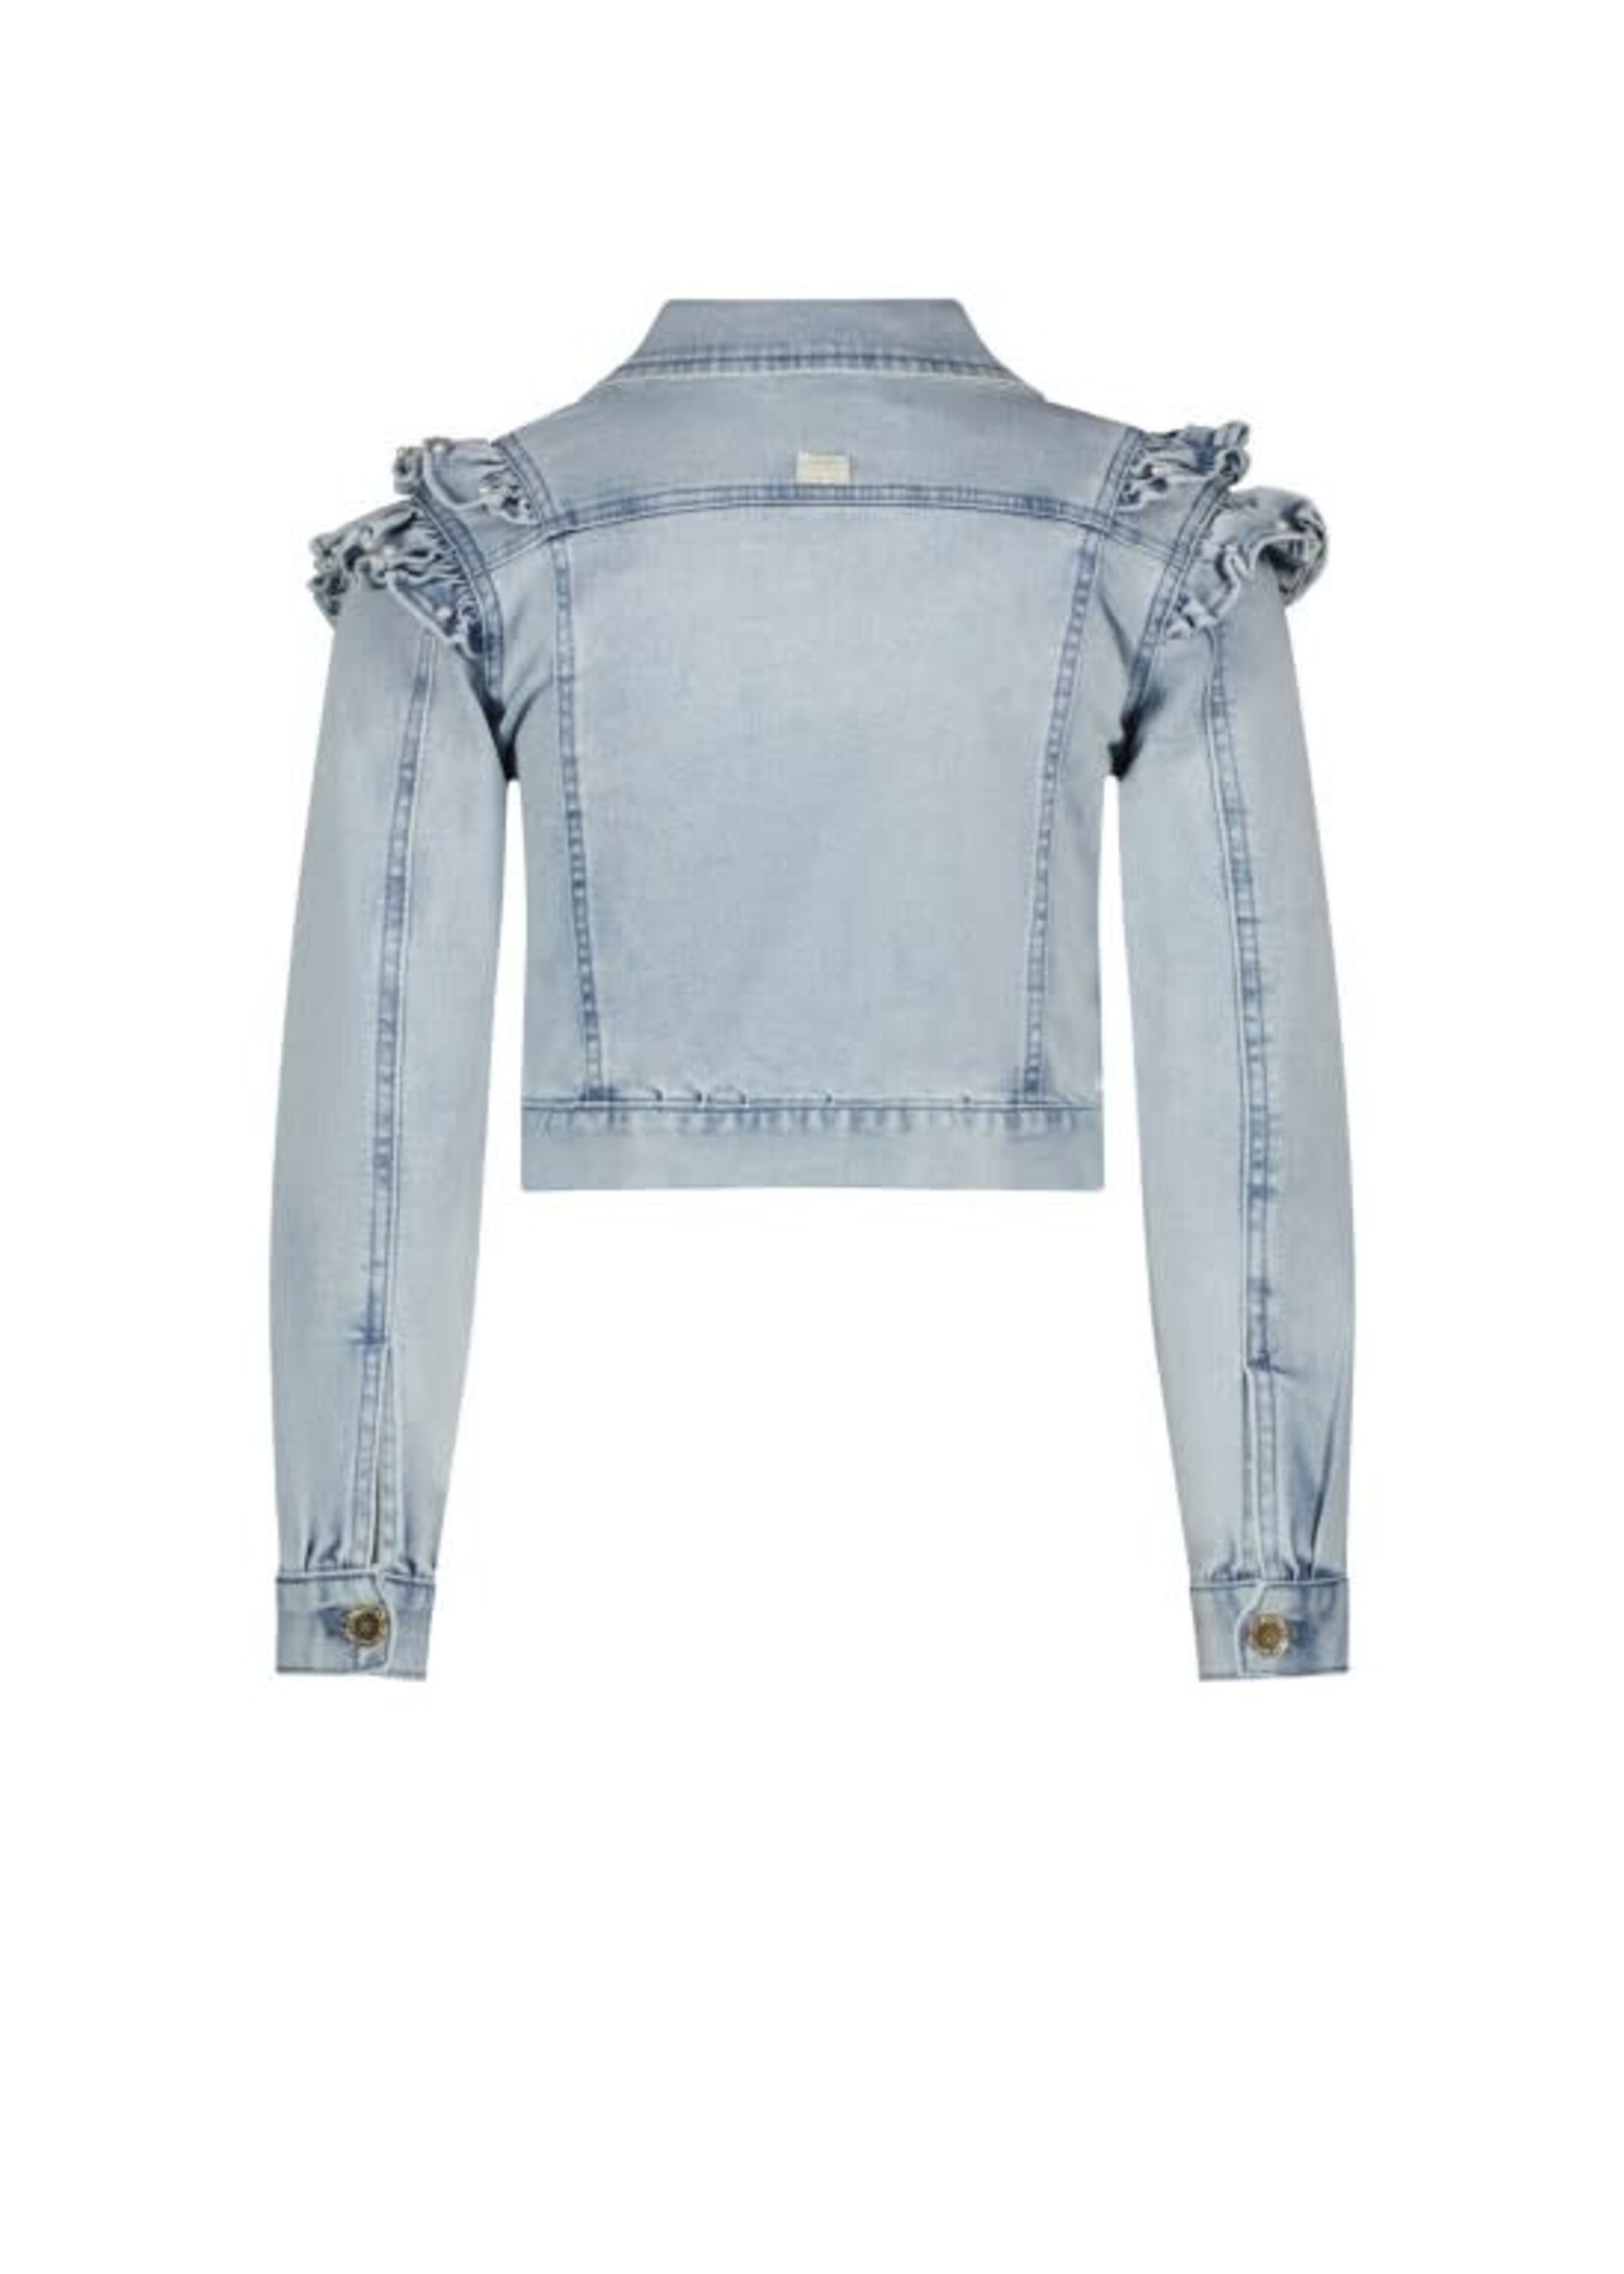 Le Chic Le Chic ALLY ruffles at armhole jacket C312-5180 Classic Light Denim